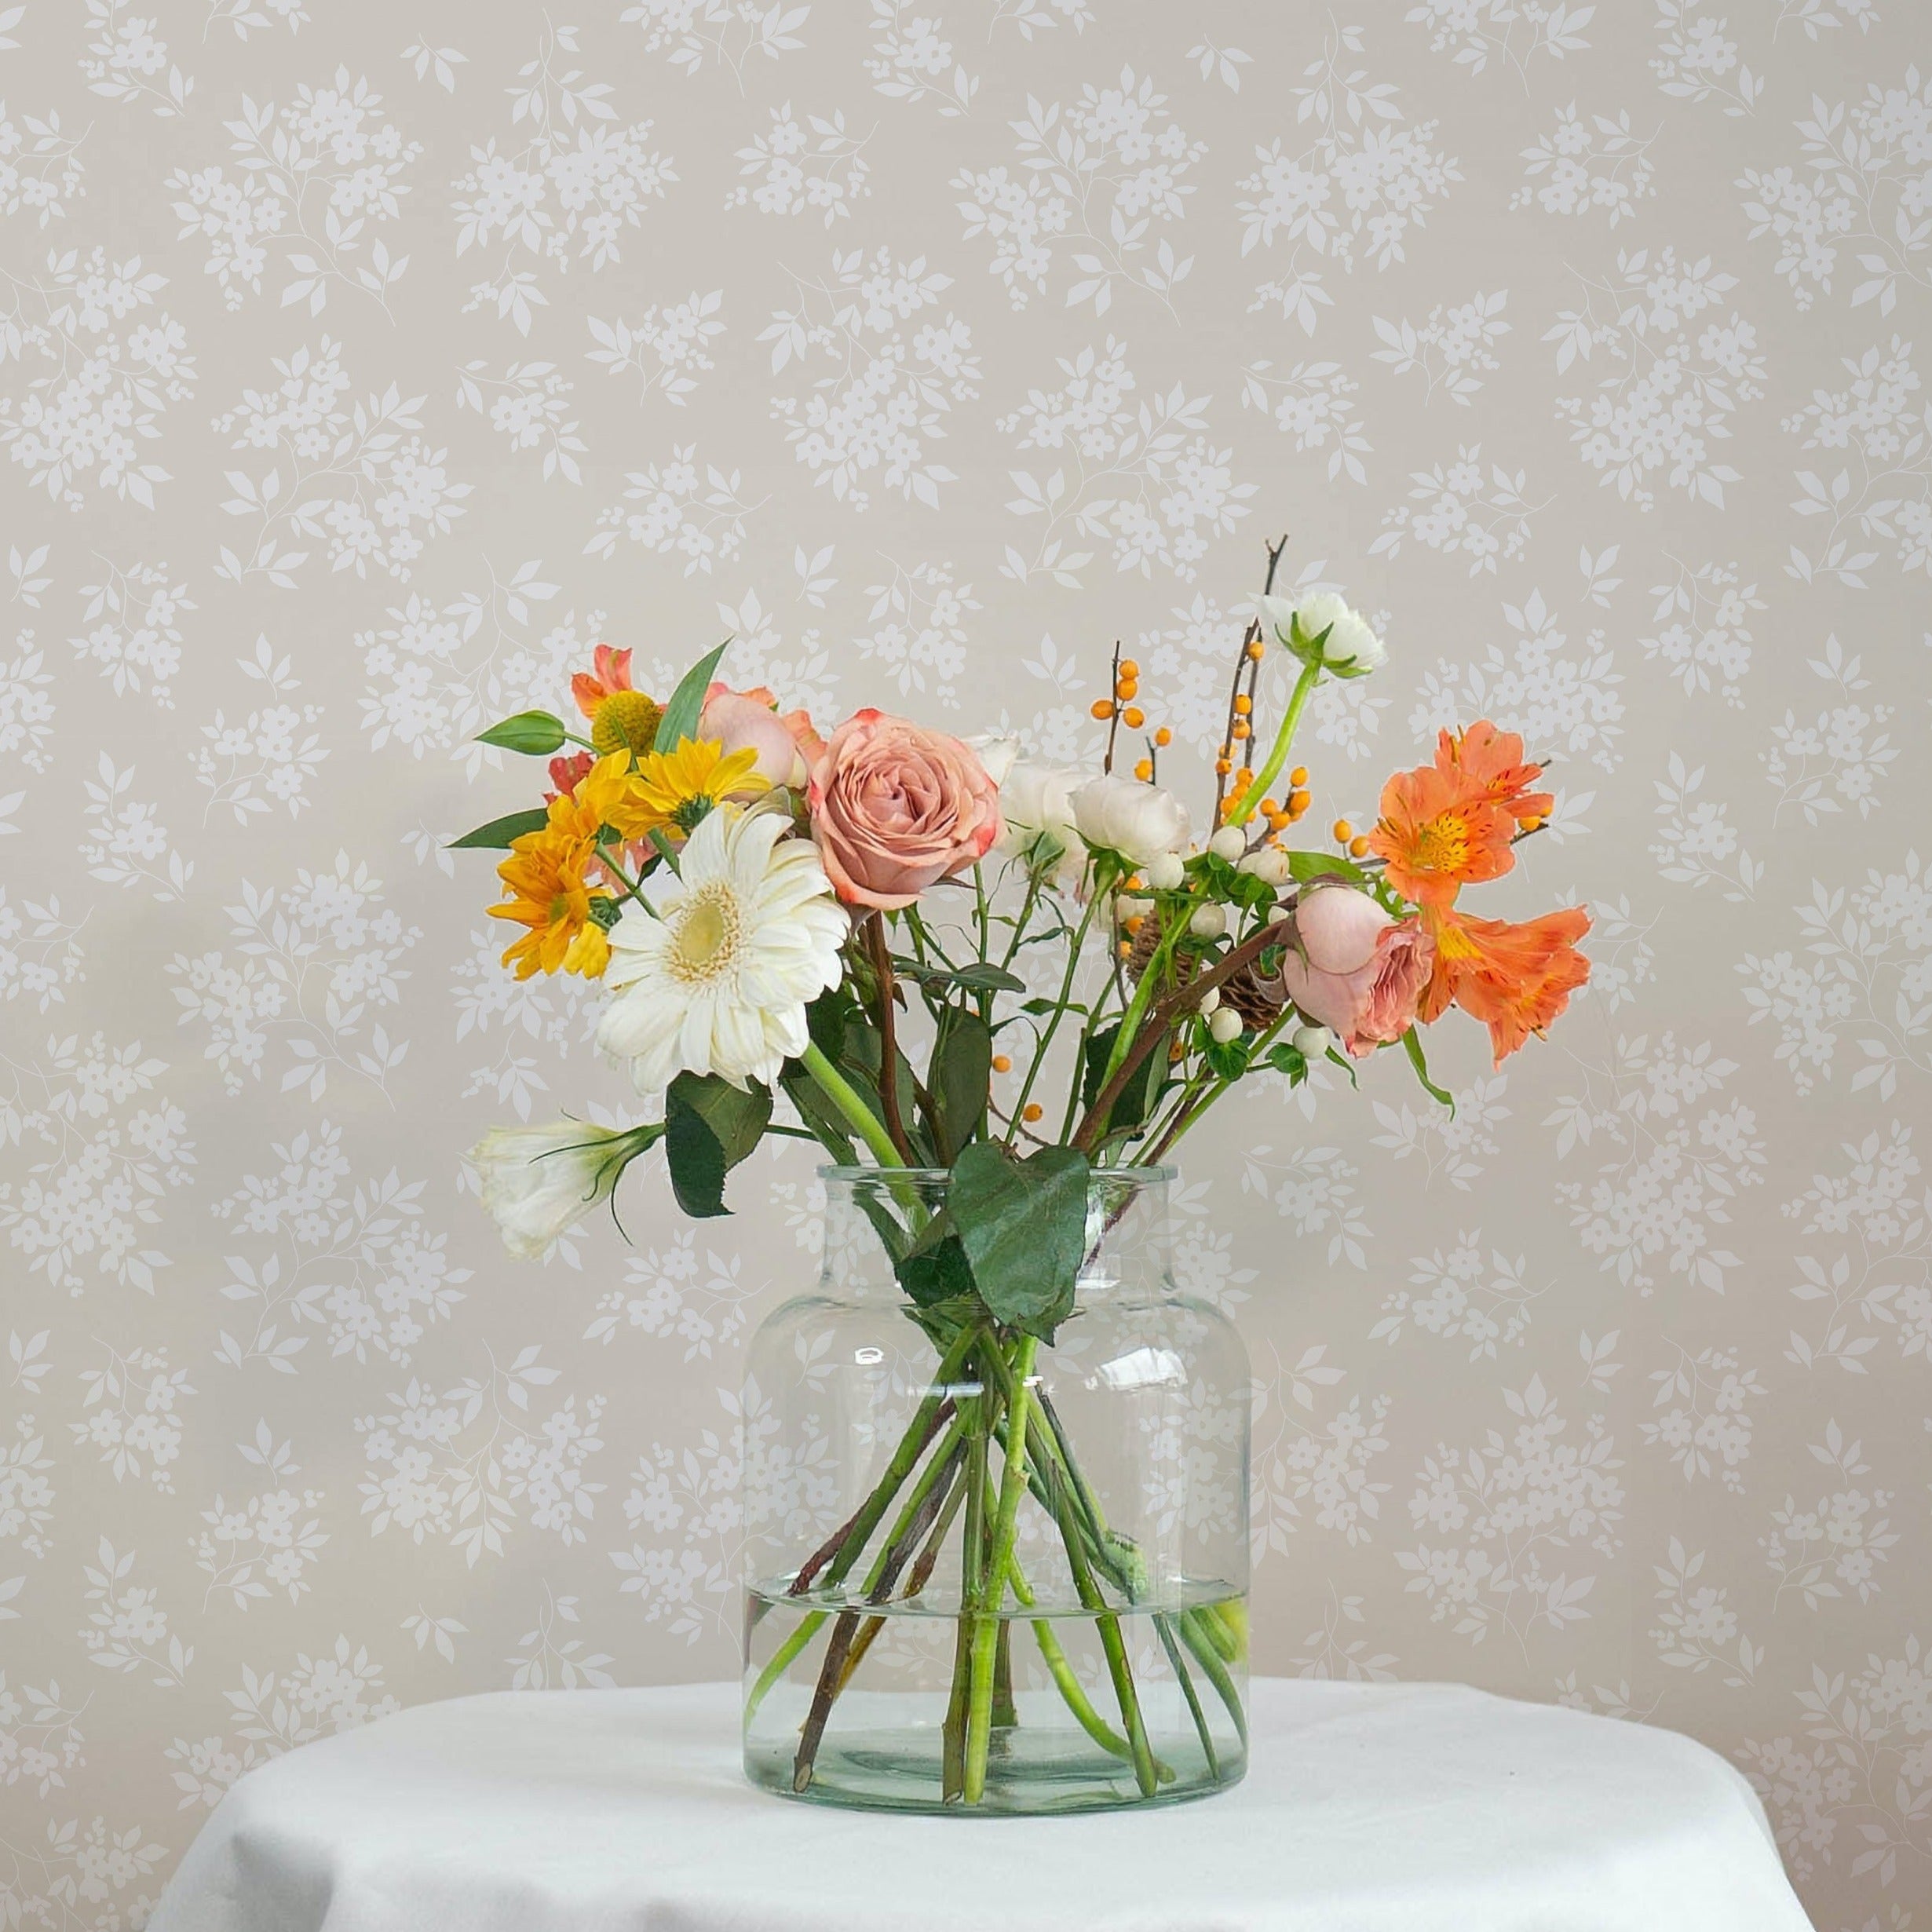 A vibrant bouquet of flowers in warm tones of orange, yellow, and pink, arranged in a clear glass vase on a table, with the Vintage Garden Floral Wallpaper - Ecru providing a subtle and sophisticated floral pattern in the backdrop, complementing the vivid colors of the bouquet.